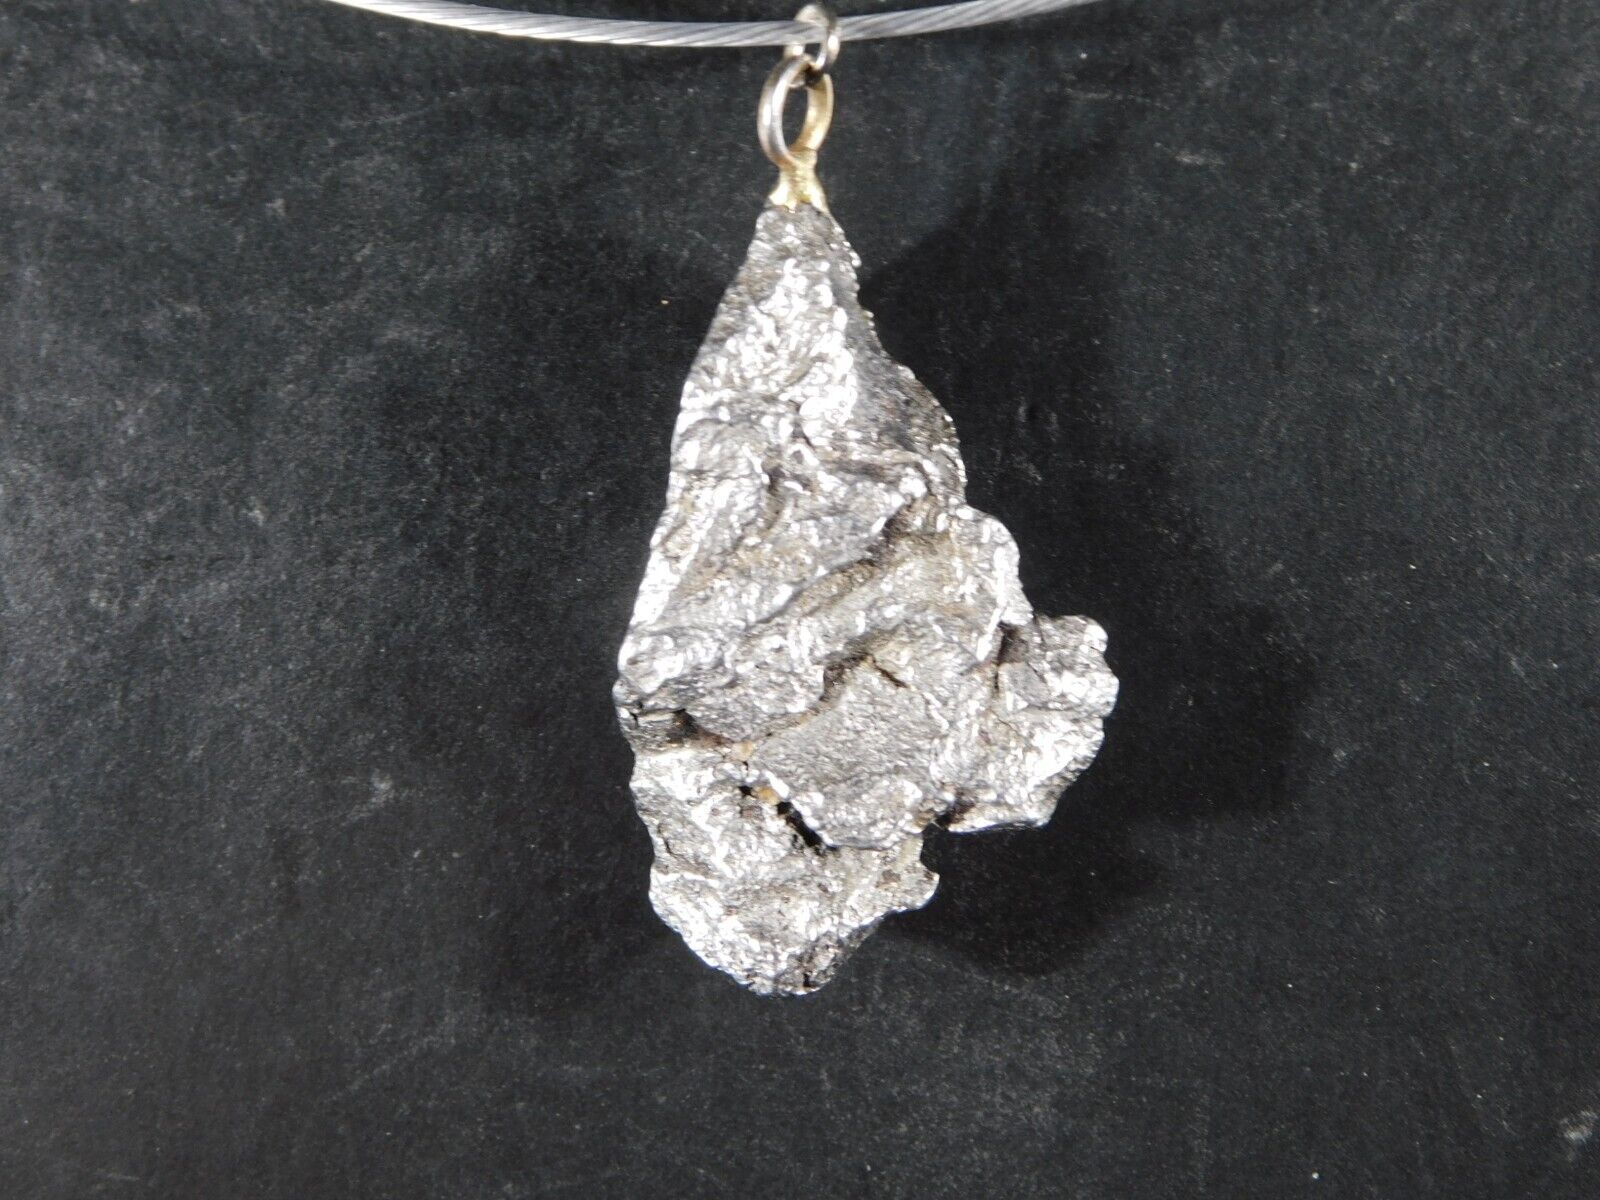 Authentic Meteorite Pendant or Necklace...a Falling Star 4.77